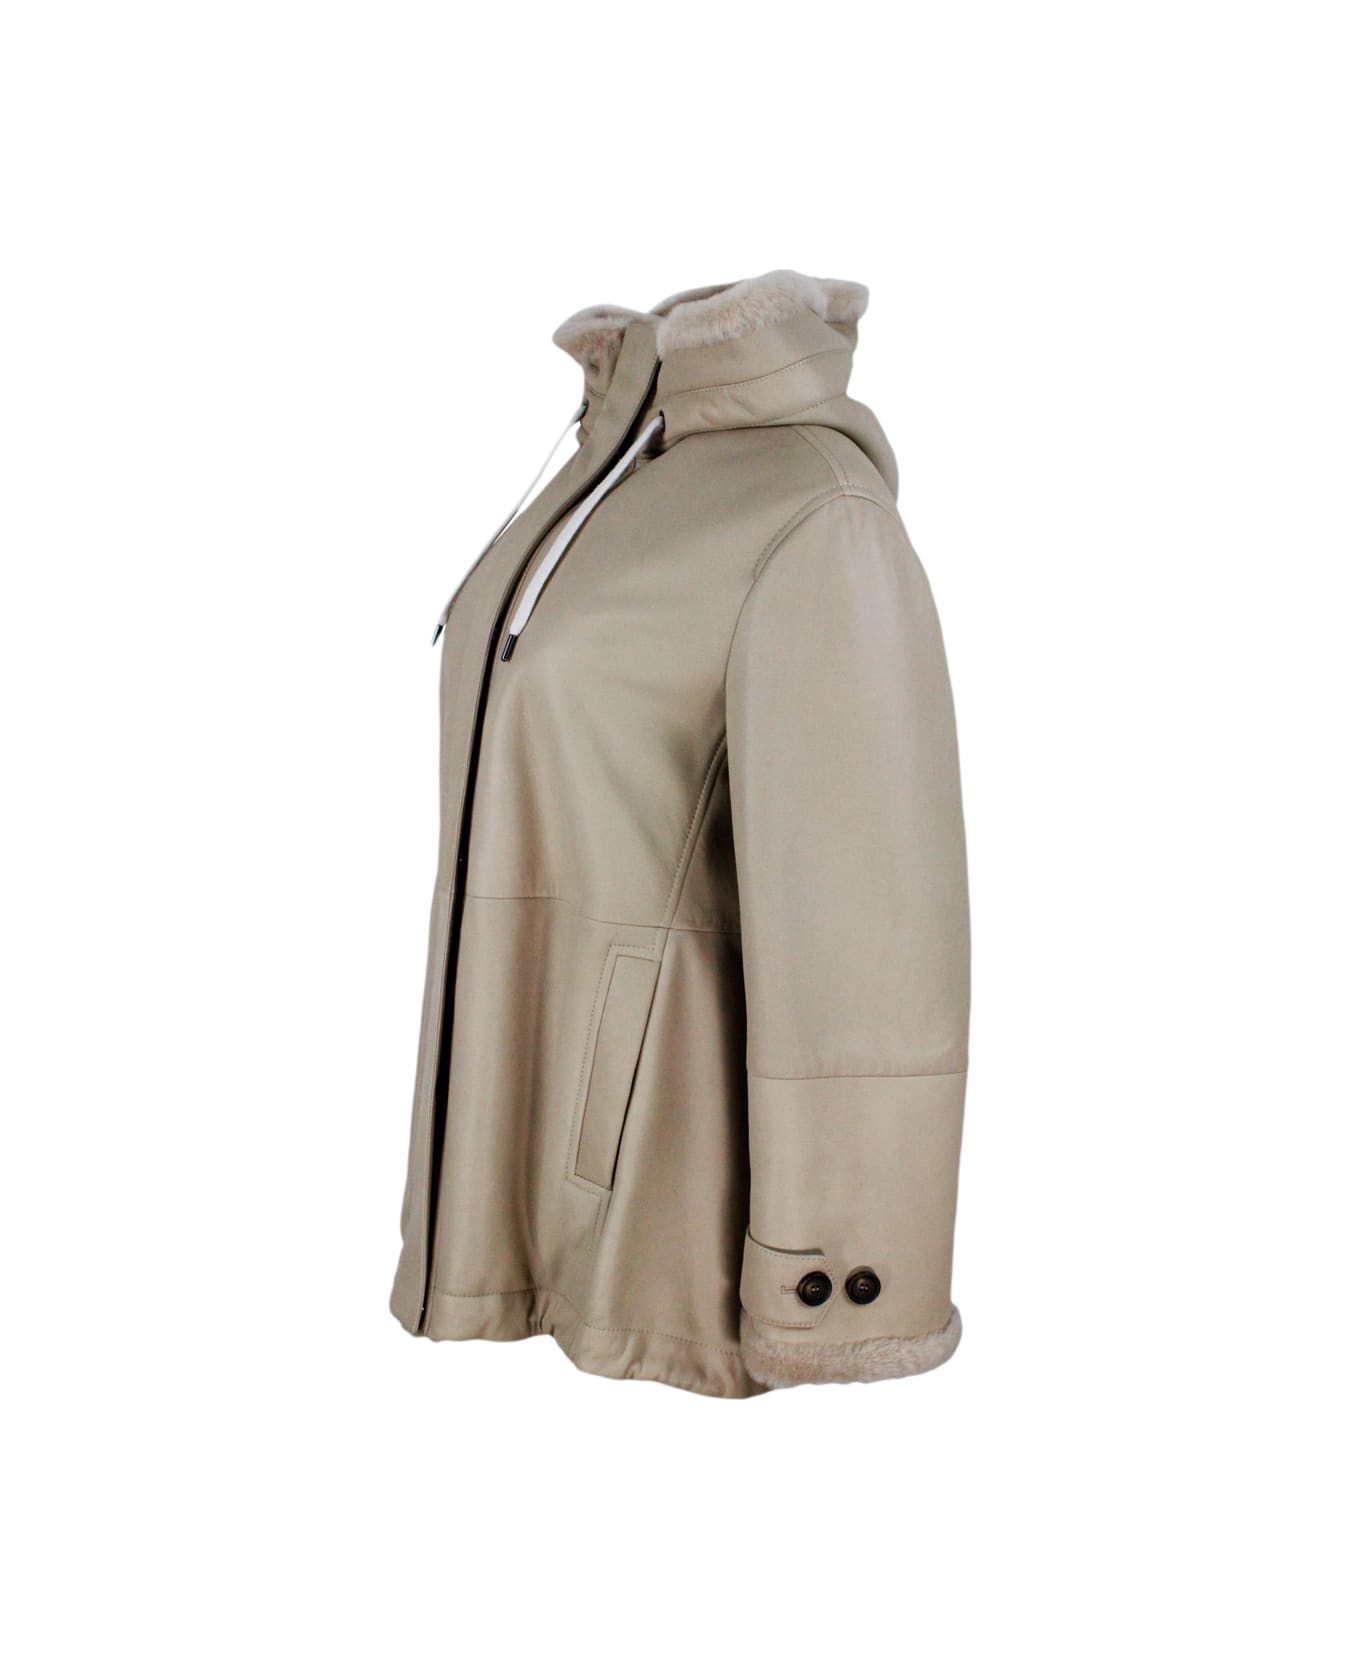 Brunello Cucinelli Soft Shearling Jacket With Hood - Beige